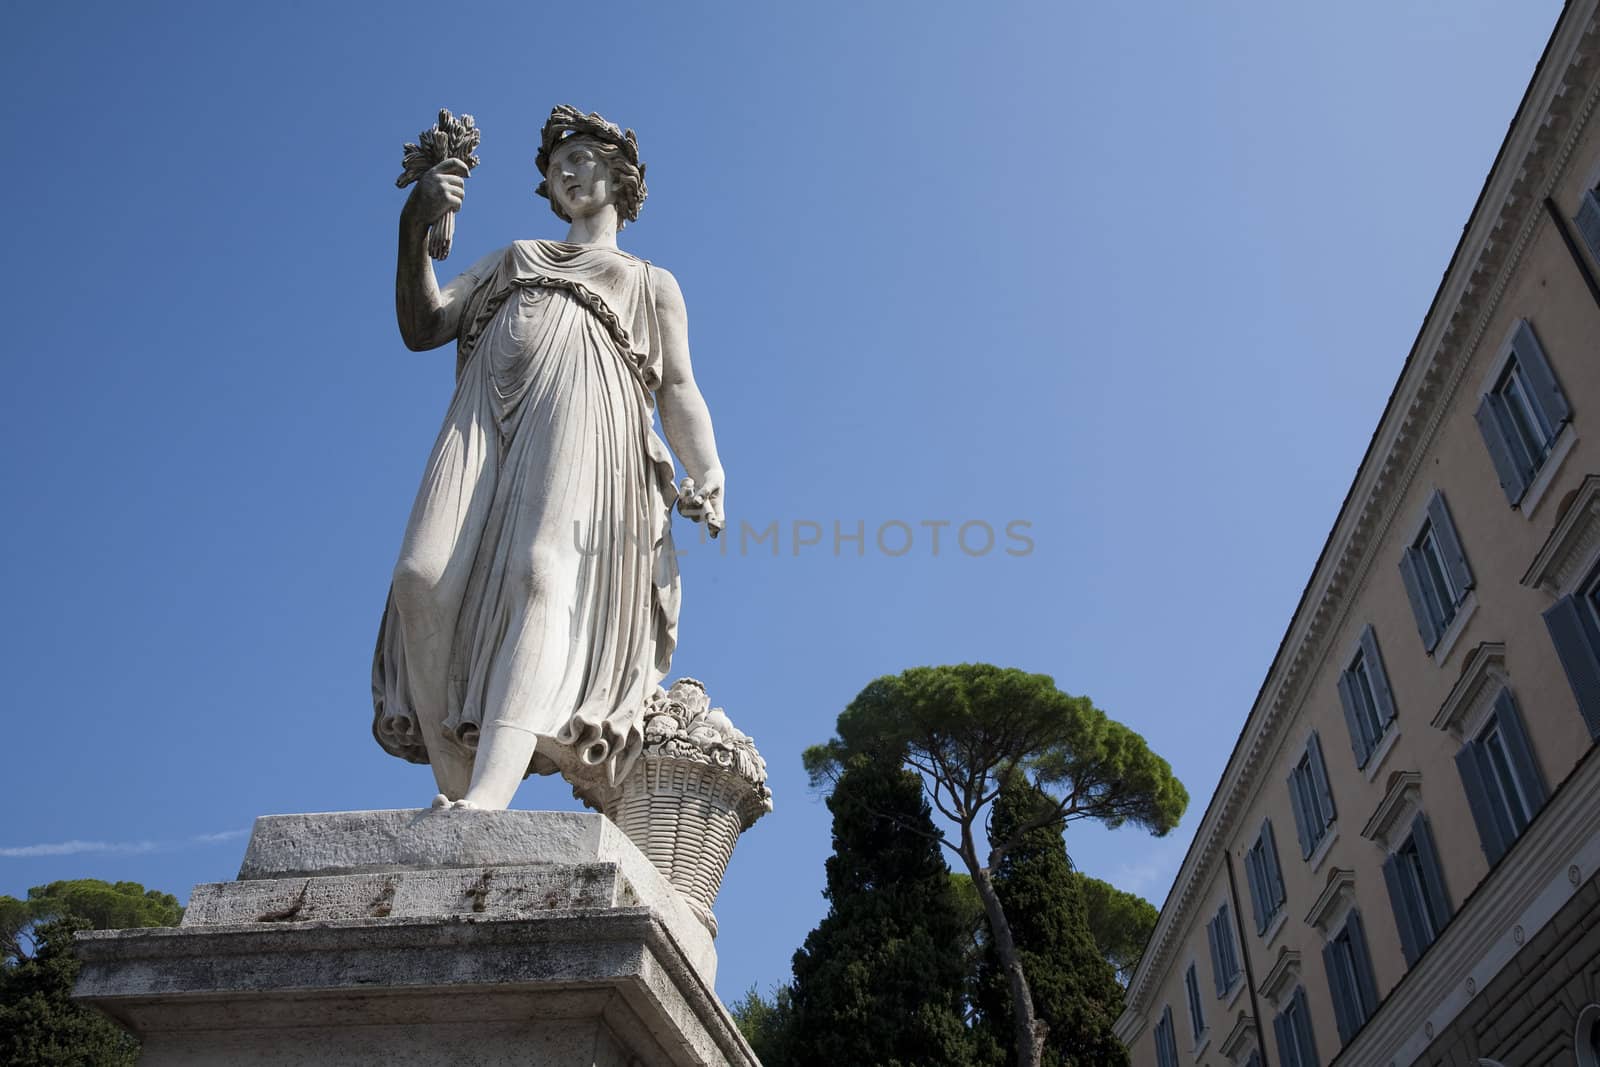 One of the four allegorical sculptures in Piazza del Popolo, Rome Italy - Summer - by Filippo Gnaccarini.